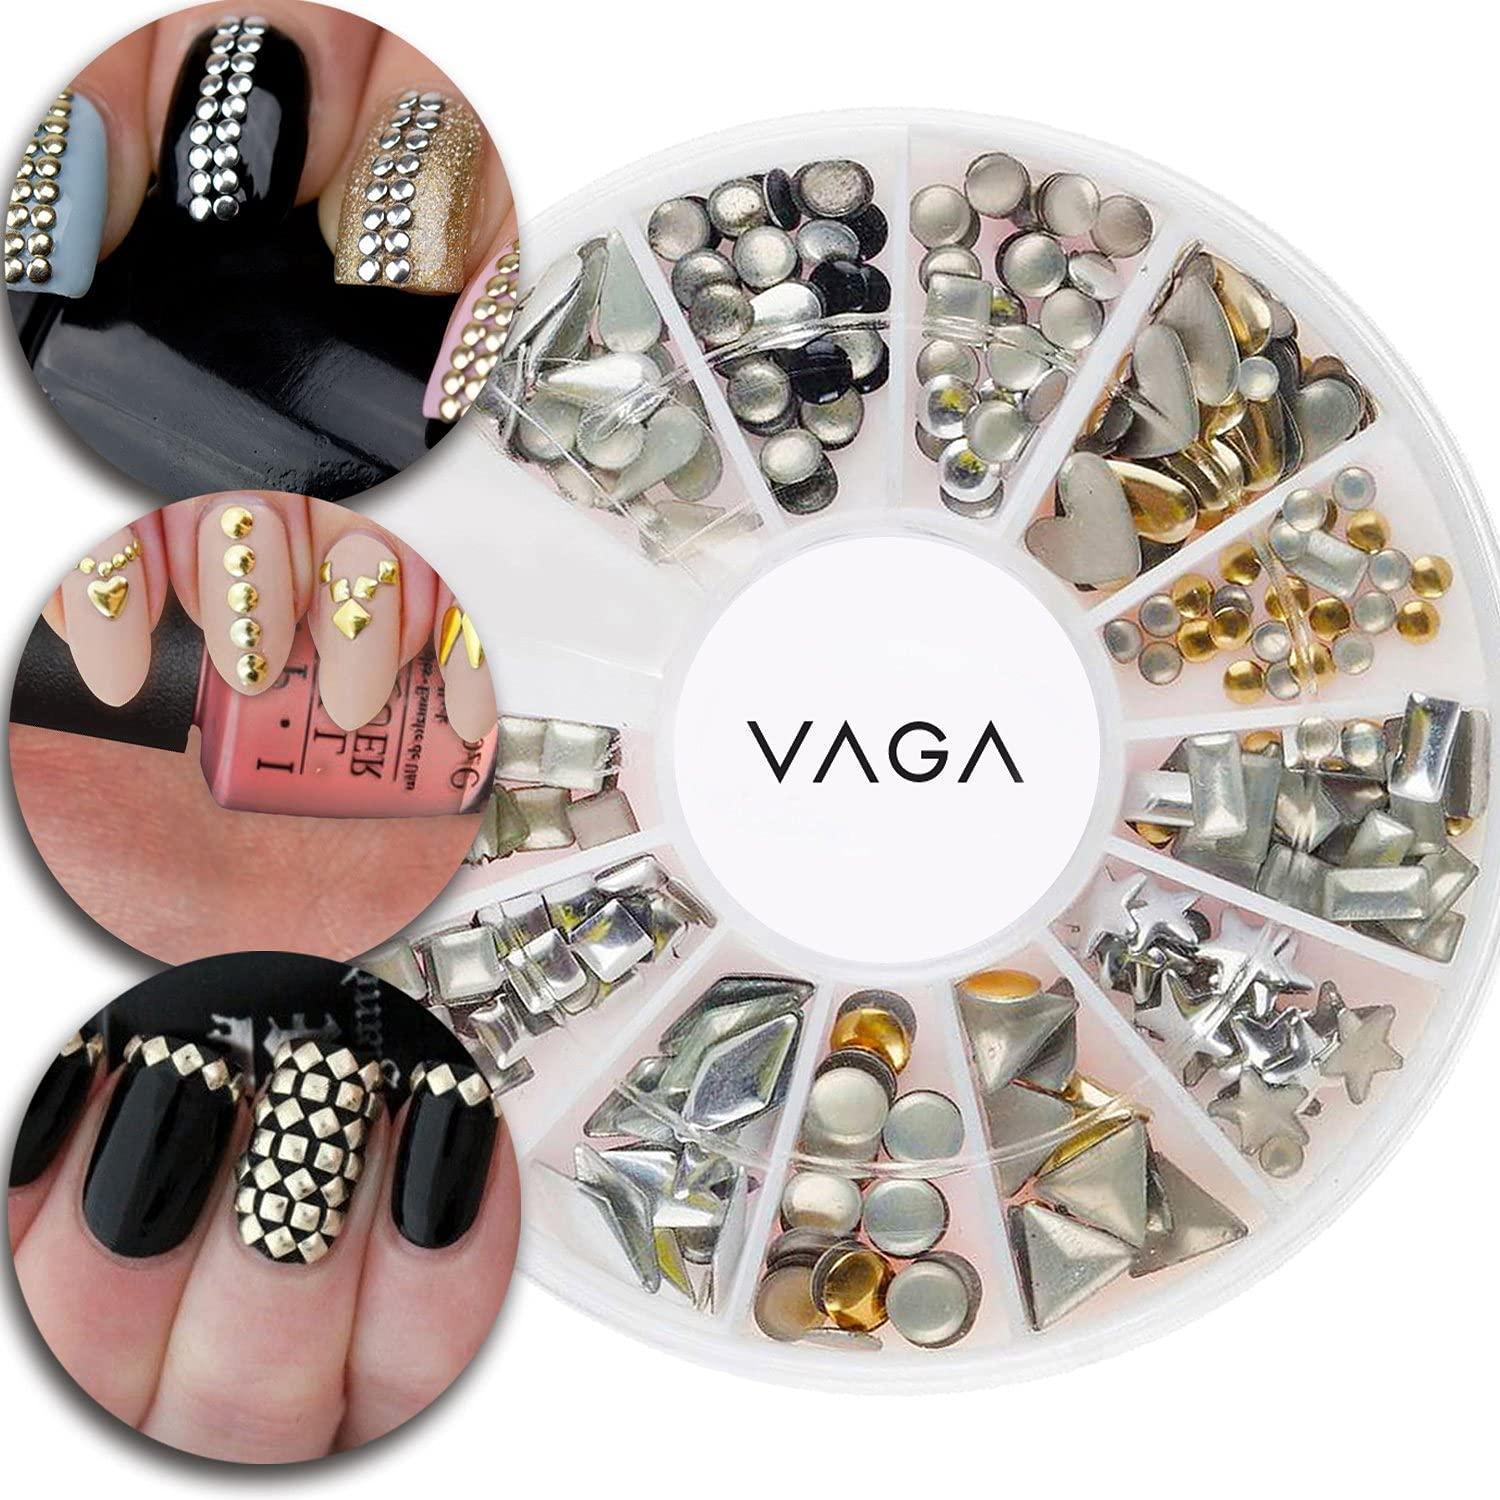 VAGA Professional Manicure 3d Nail Art Decorations For Nail Art Supplies  This Wheel Includes Gold And Silver Metal Studs In 12 Different Shapes, the  Perfect Nail Jewelry and Decorations